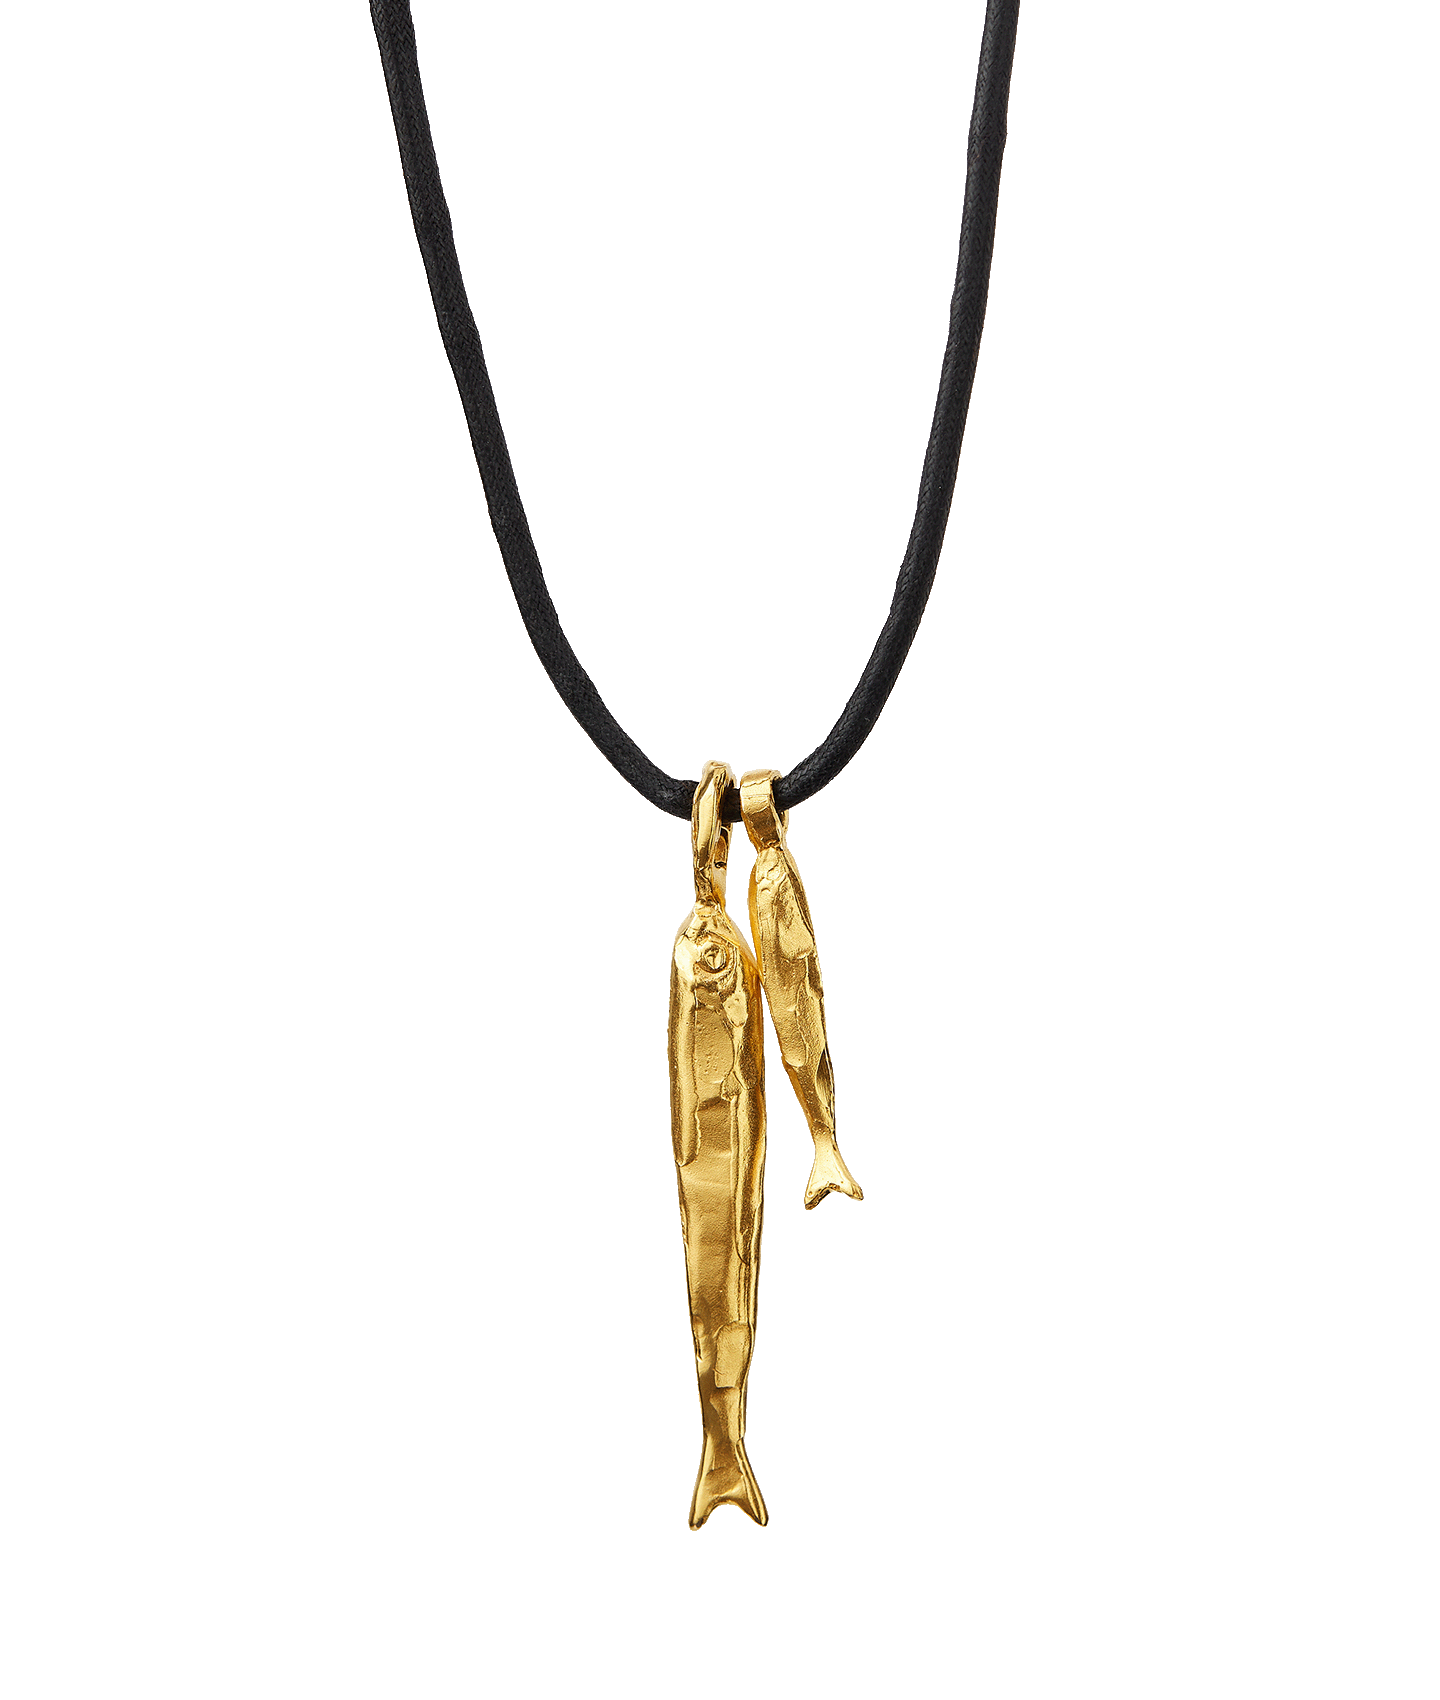 The Gone Fishing Necklace – Alighieri